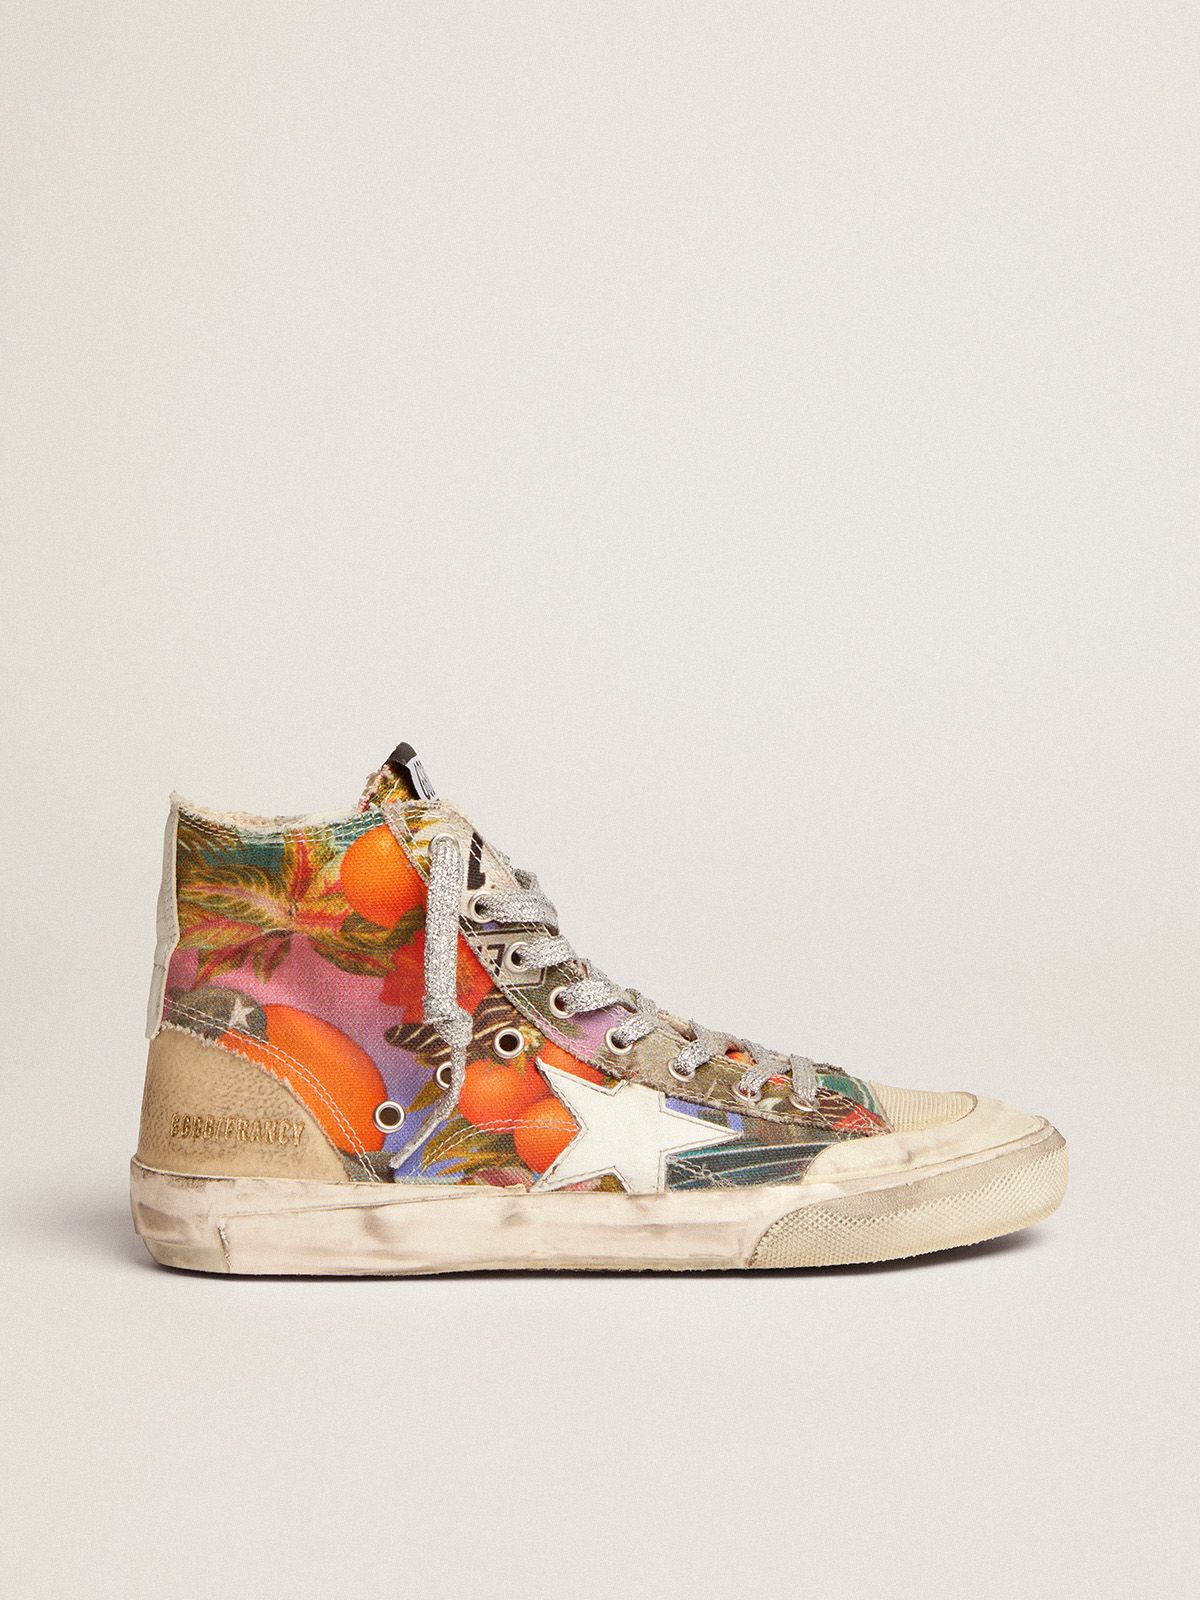 Golden Goose Uomo Saldi Francy Penstar sneakers in canvas with multicolor Hawaii print and white leather star